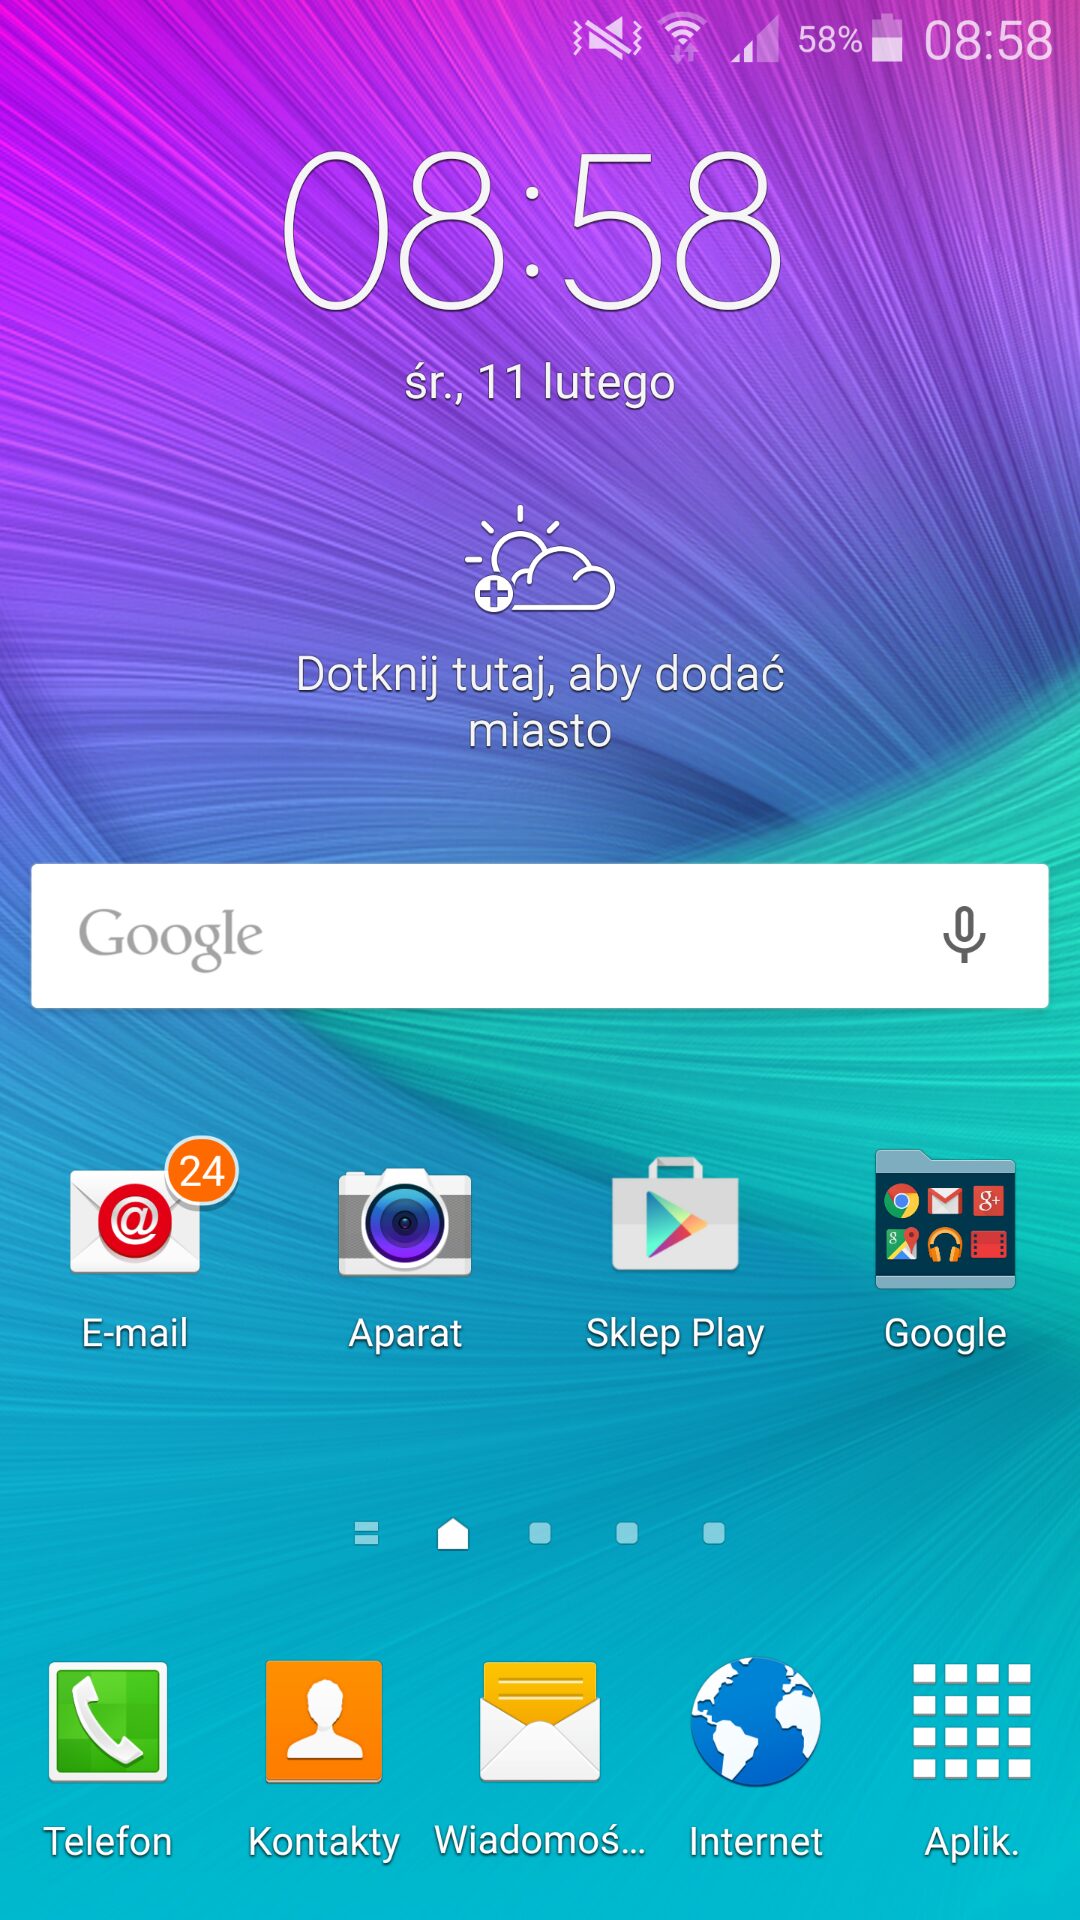 galaxy note 4 android 5.0.1 lollipop